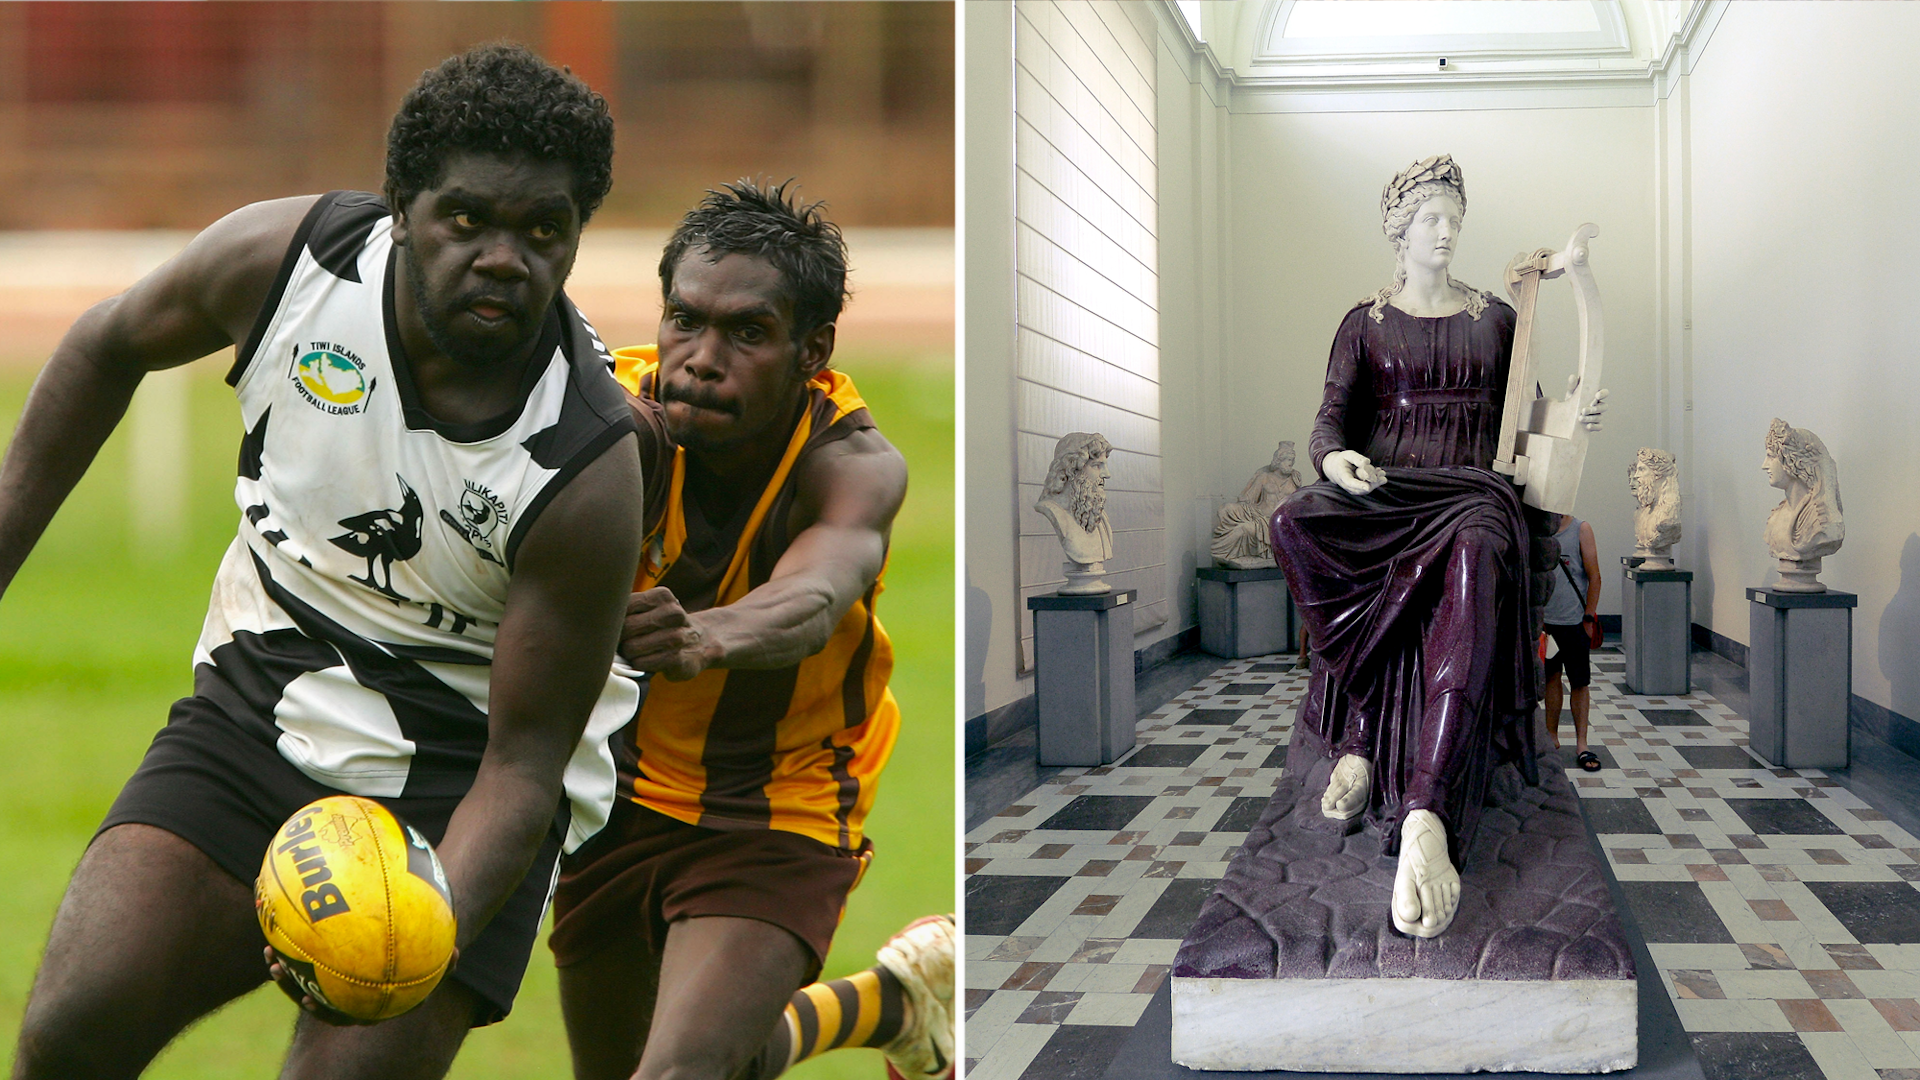 A split image. On the left, the Muluwurri Magpies from Melville Island (wearing black and white) play against the Tapalinga Super Stars in a game of Australian Rules football. On the right. The Farnese Collection at Museo Archeologico Nazionale in Naples. 